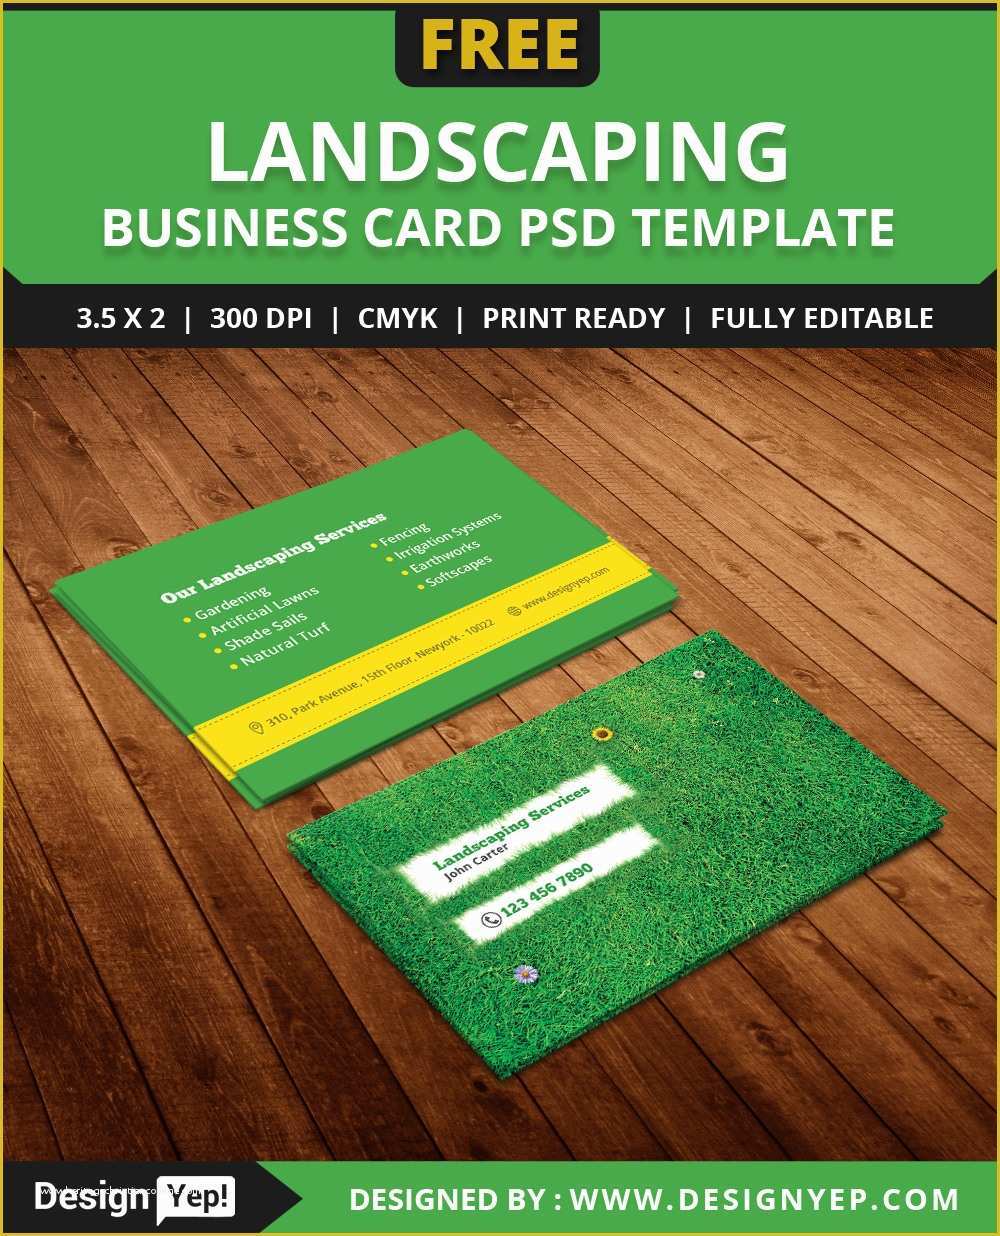 Free Lawn Care Templates Of Free Landscaping Business Card Template Psd On Behance